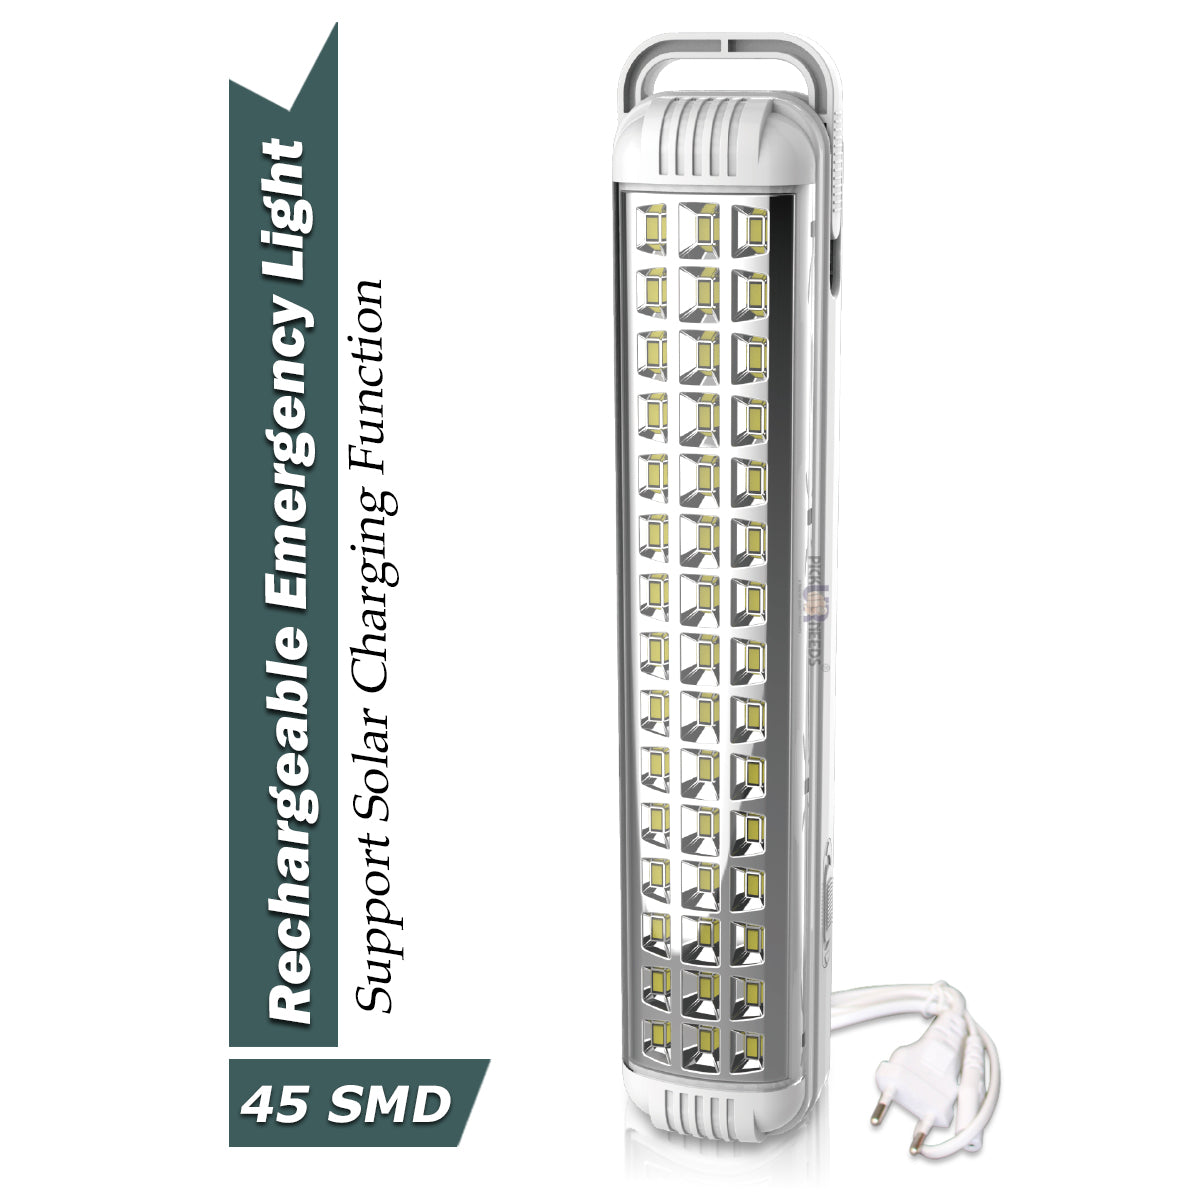 Rechargeable Long 45 SMD Light with 15 Hours Backup Lantern Emergency Light